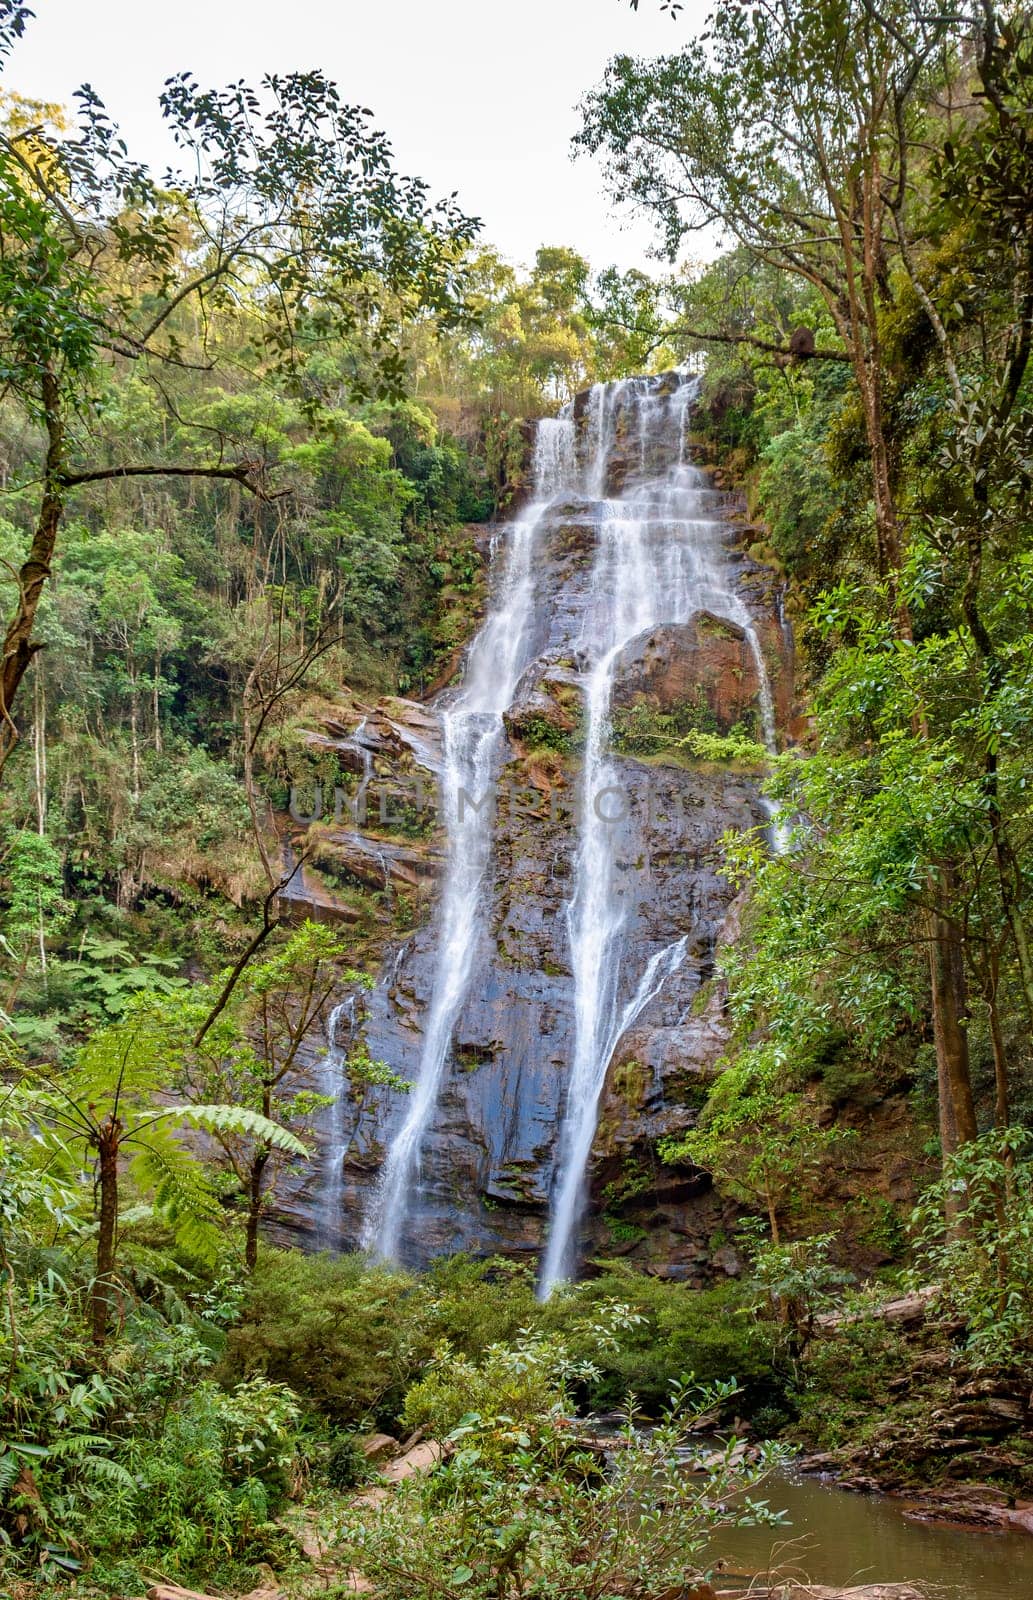 Waterfall within the rainforest of the state of Minas Gerais, Brazil